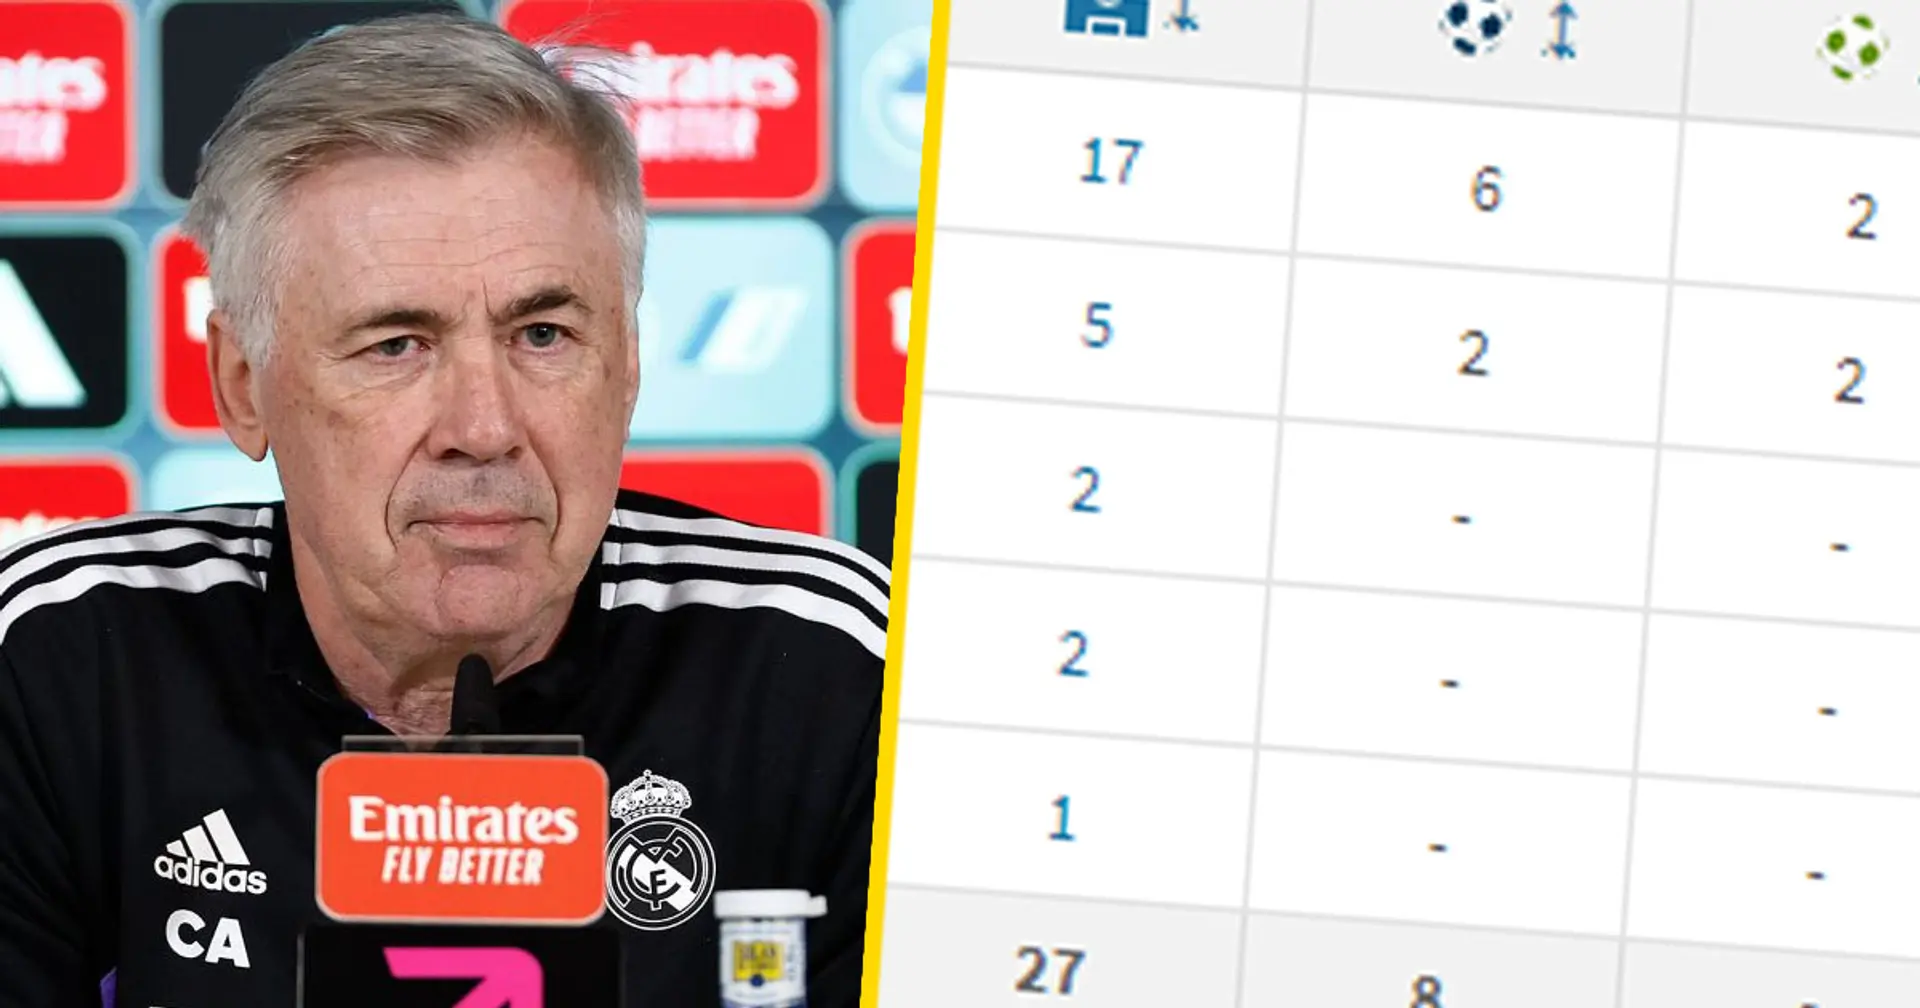 Ancelotti names player who hasn't returned to his best level yet - he was crucial before World Cup